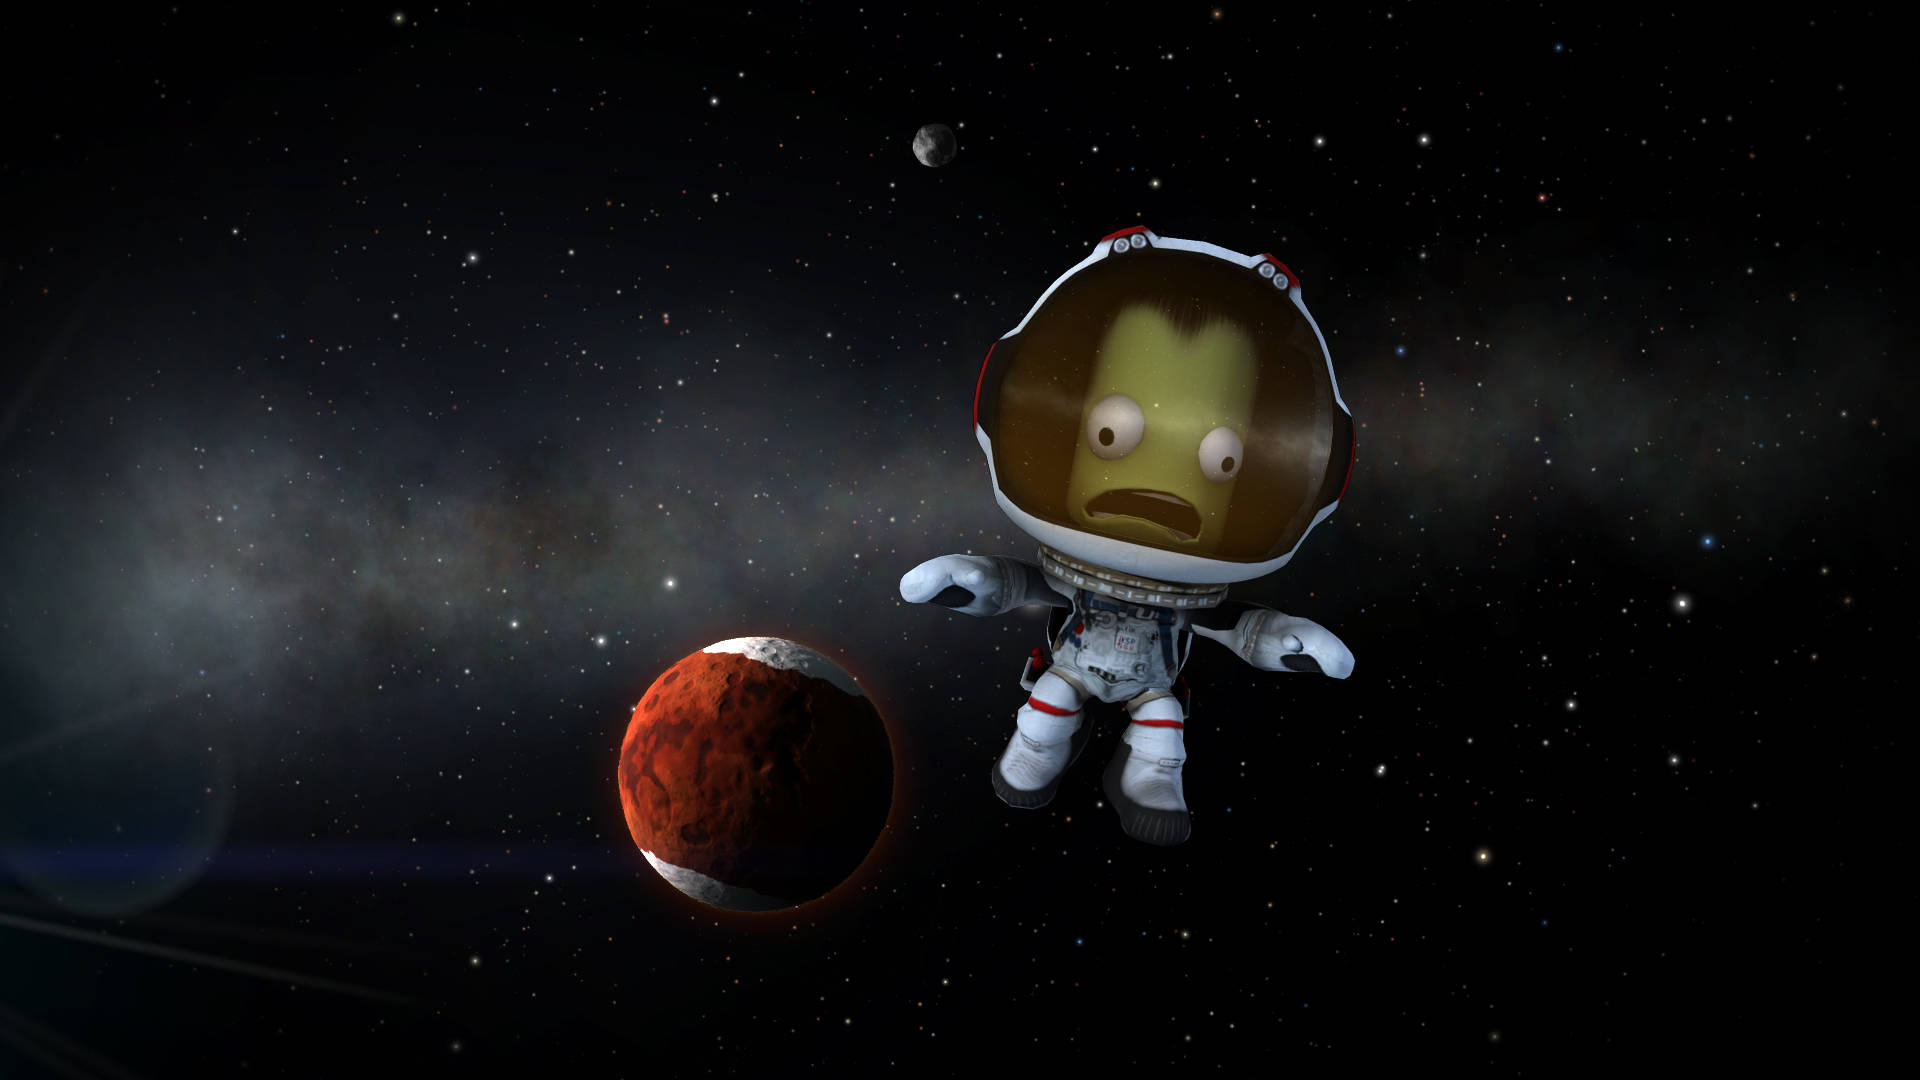 Kerbal Space Program Alien With Planet Background